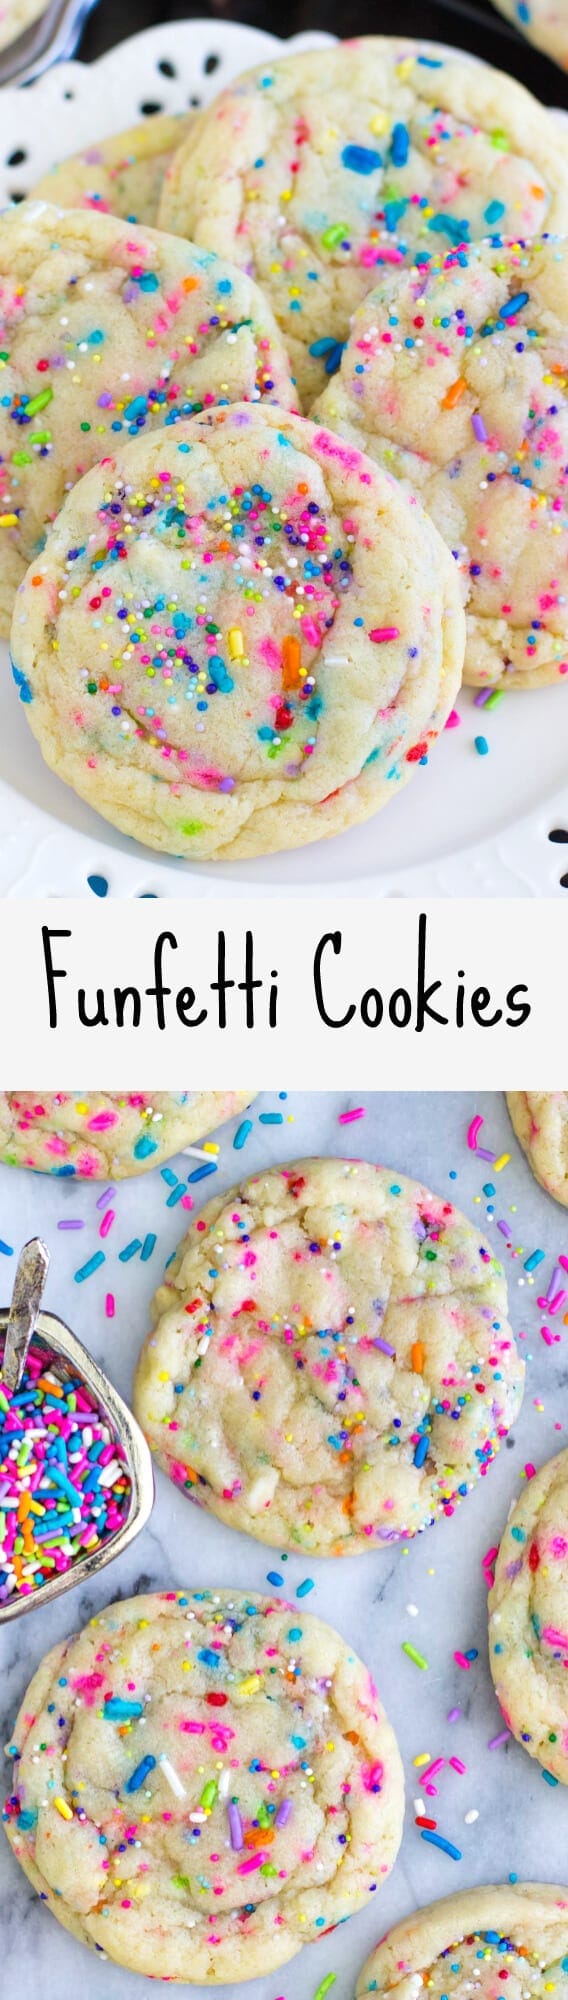 Funfetti Cookies -- These were so good and easy to make (no mixer)!